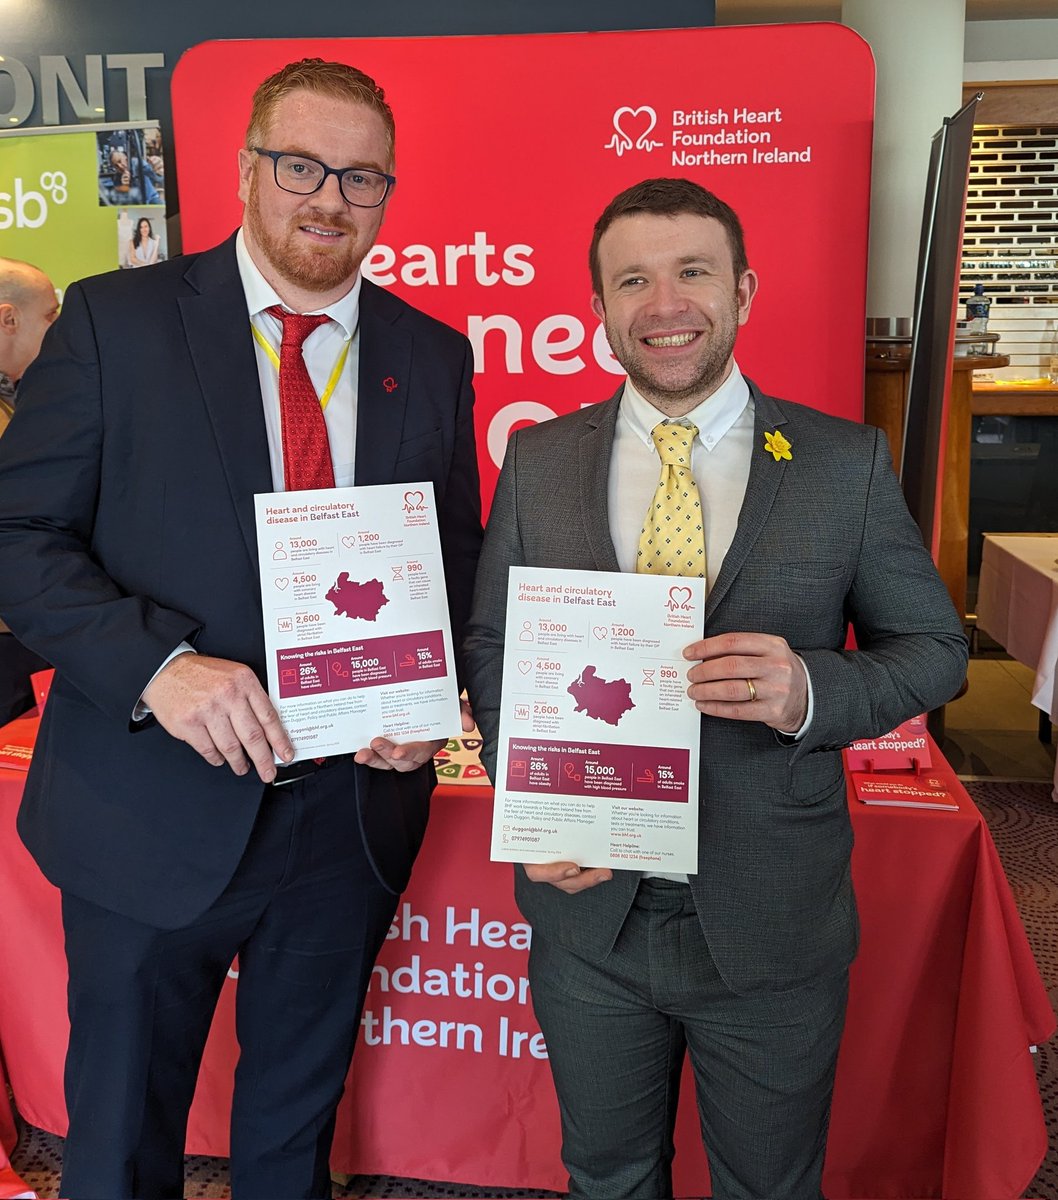 Thanks to @dhoneyford and @PMcReynoldsMLA for calling over to hear about the need to address the heart attack gender gap and the need for improved outcomes